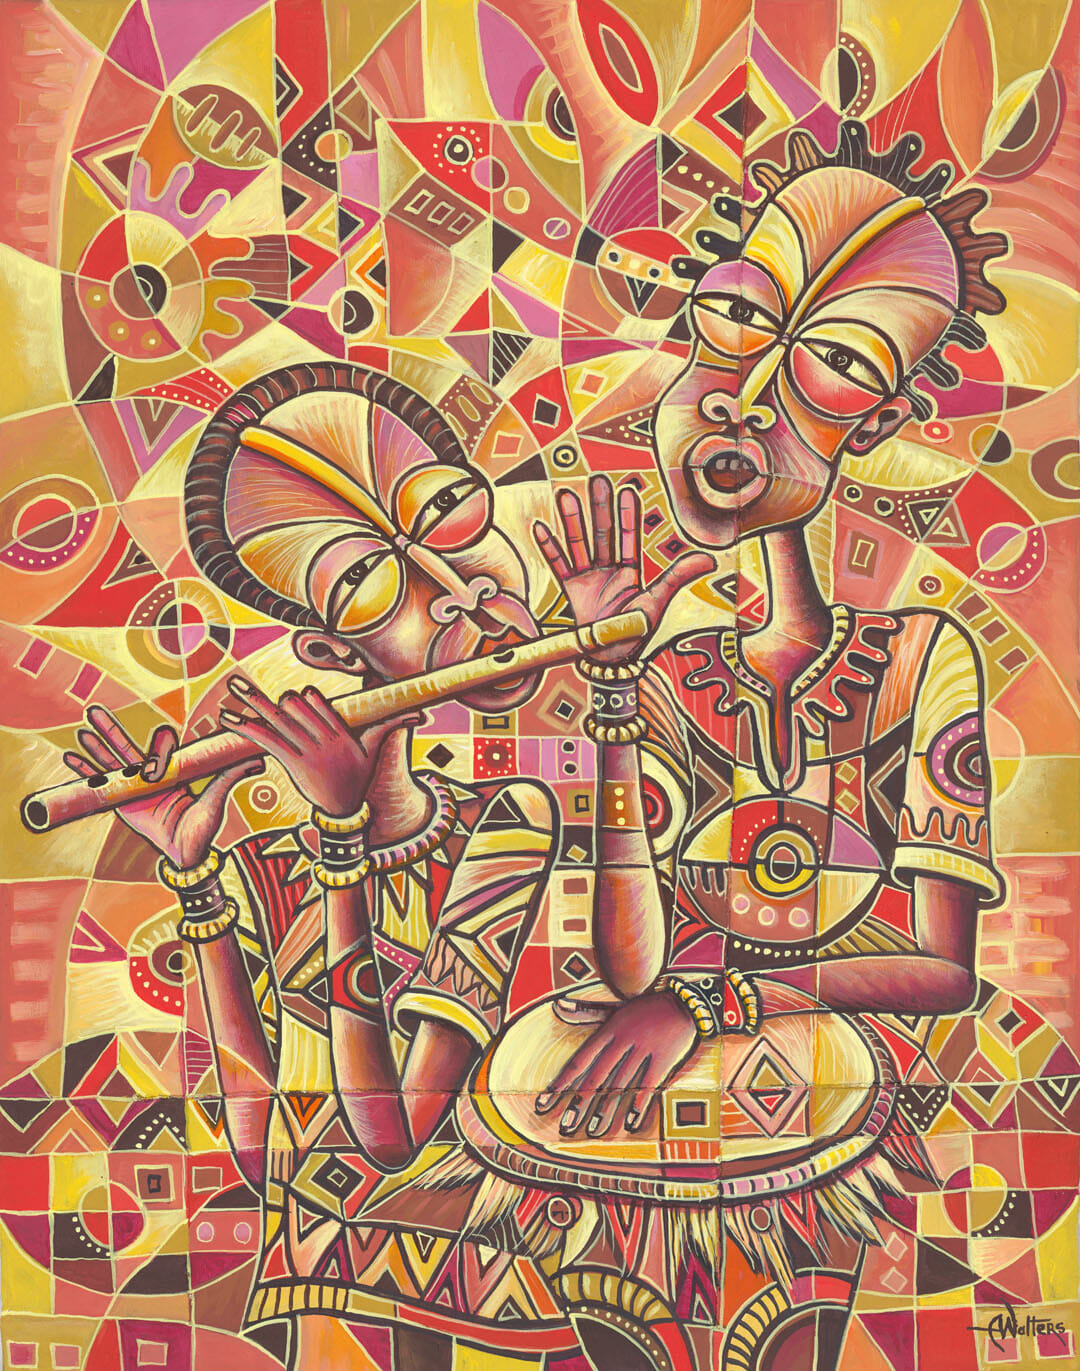 The Drummer and the Flutist III